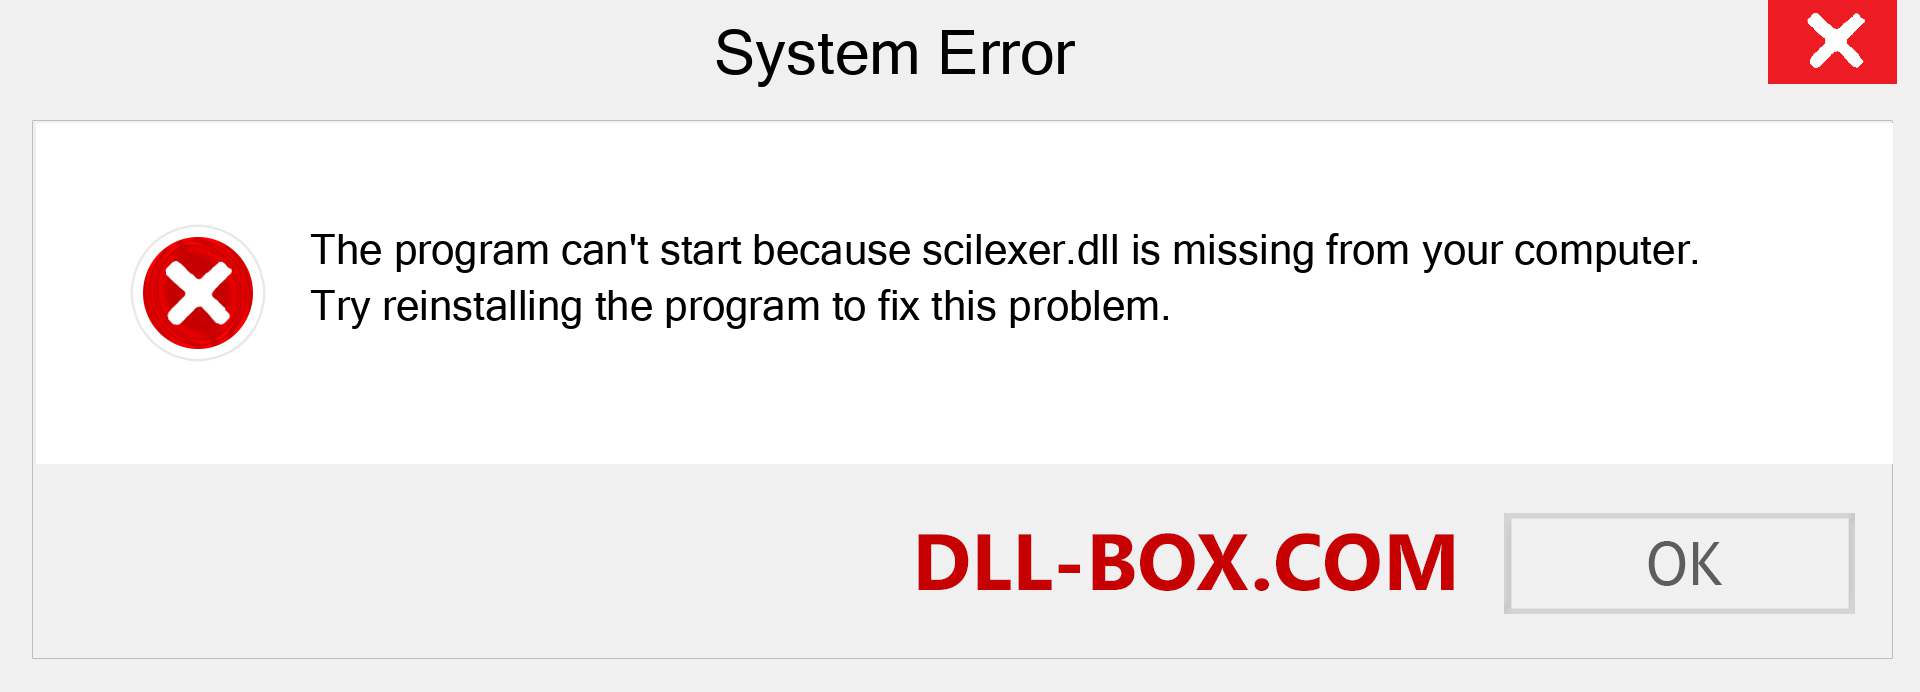  scilexer.dll file is missing?. Download for Windows 7, 8, 10 - Fix  scilexer dll Missing Error on Windows, photos, images